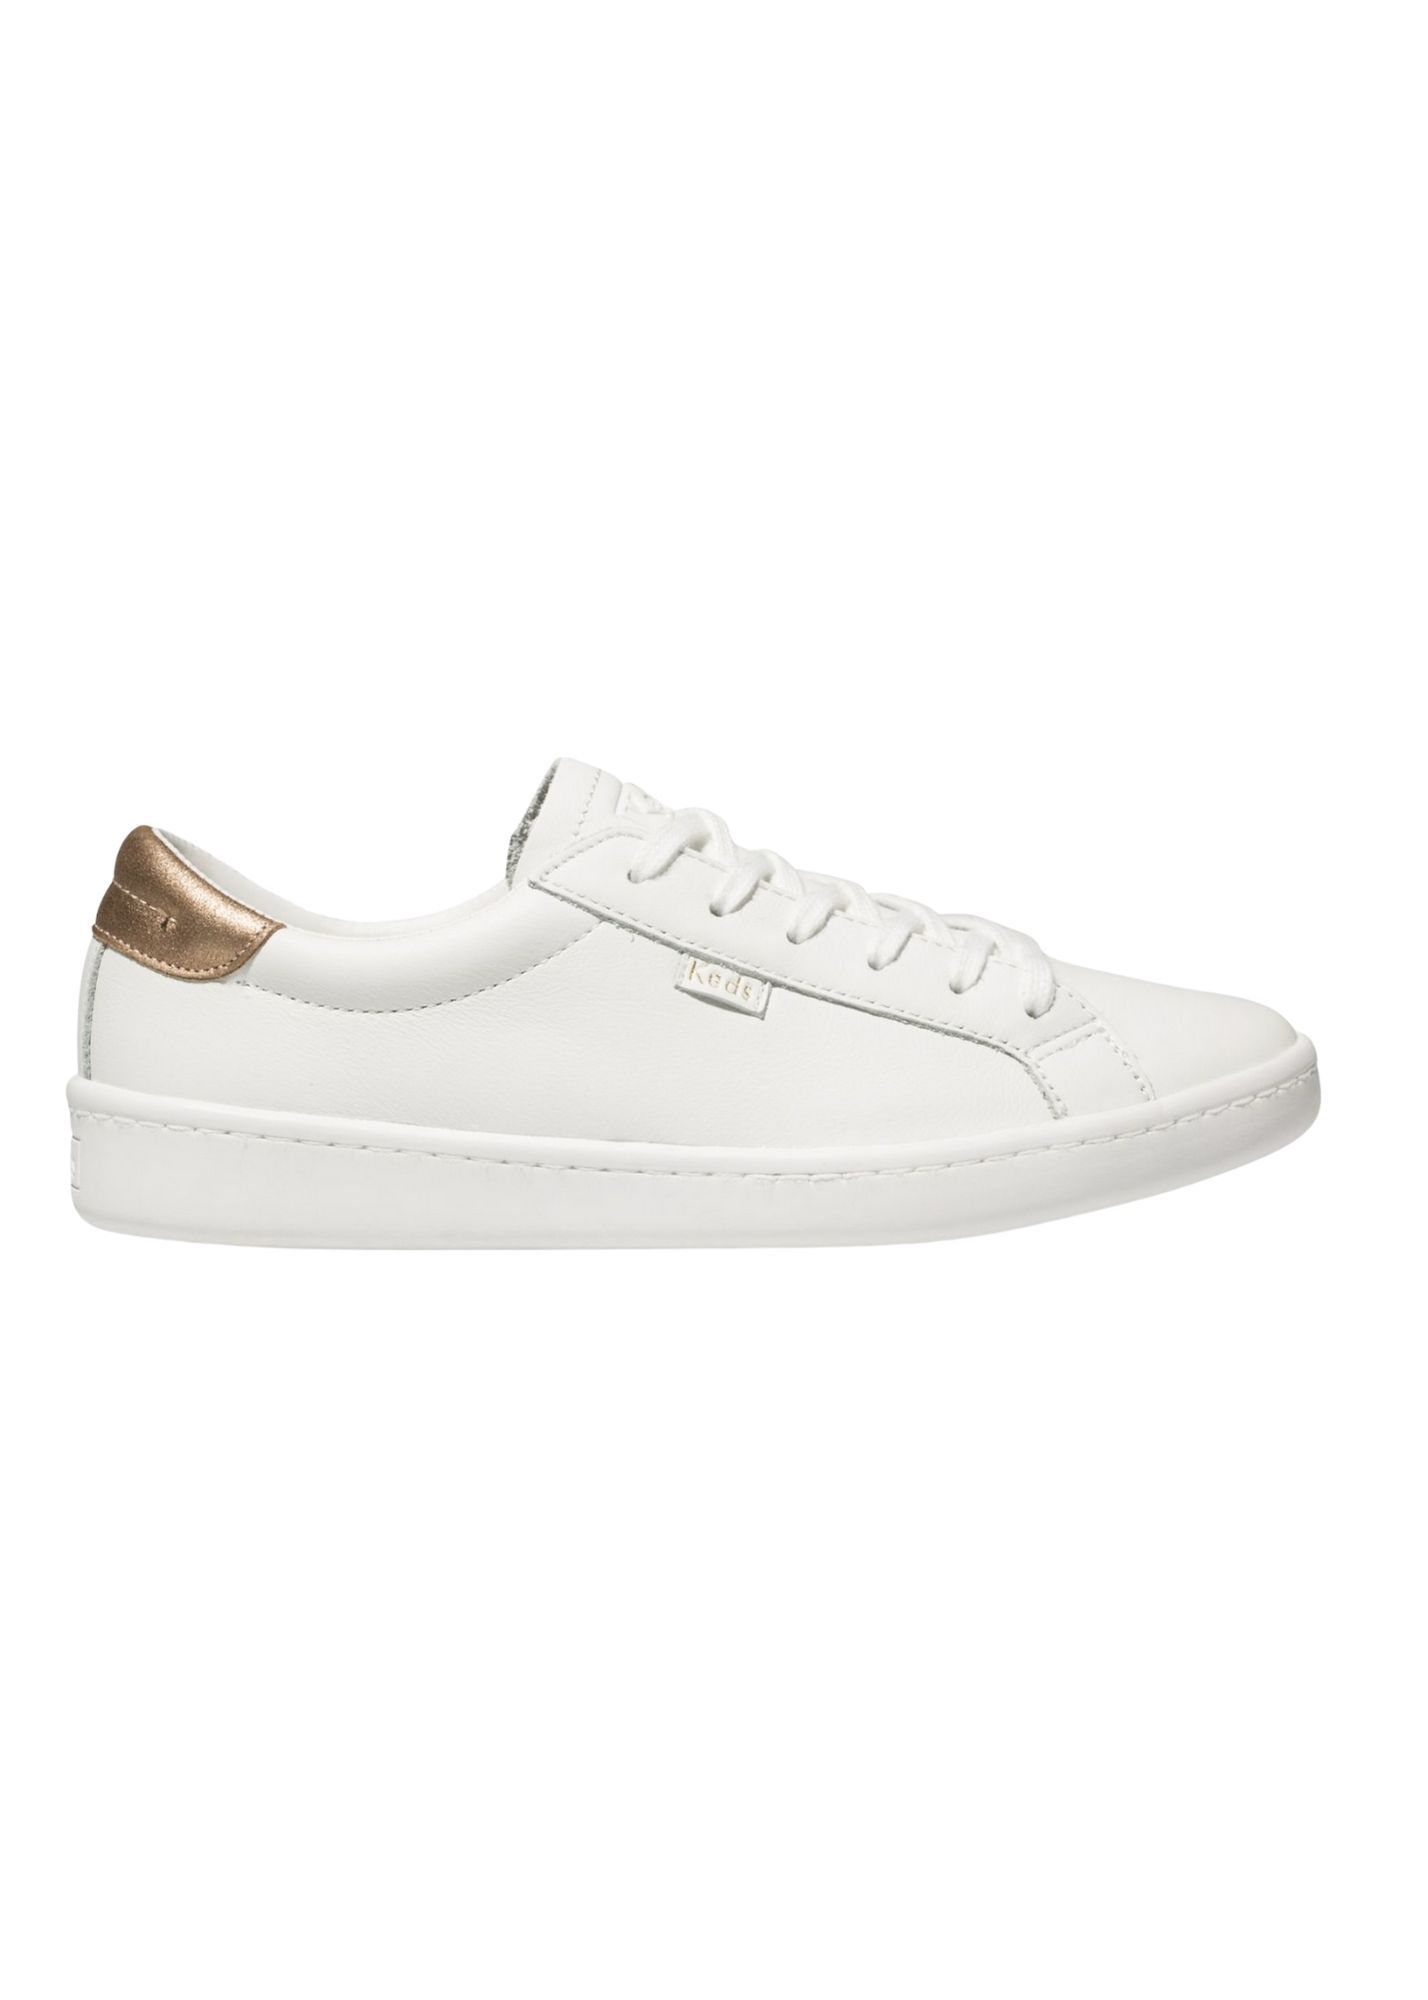 Keds White + Rose Gold Leather Sneaker Shoes Keds